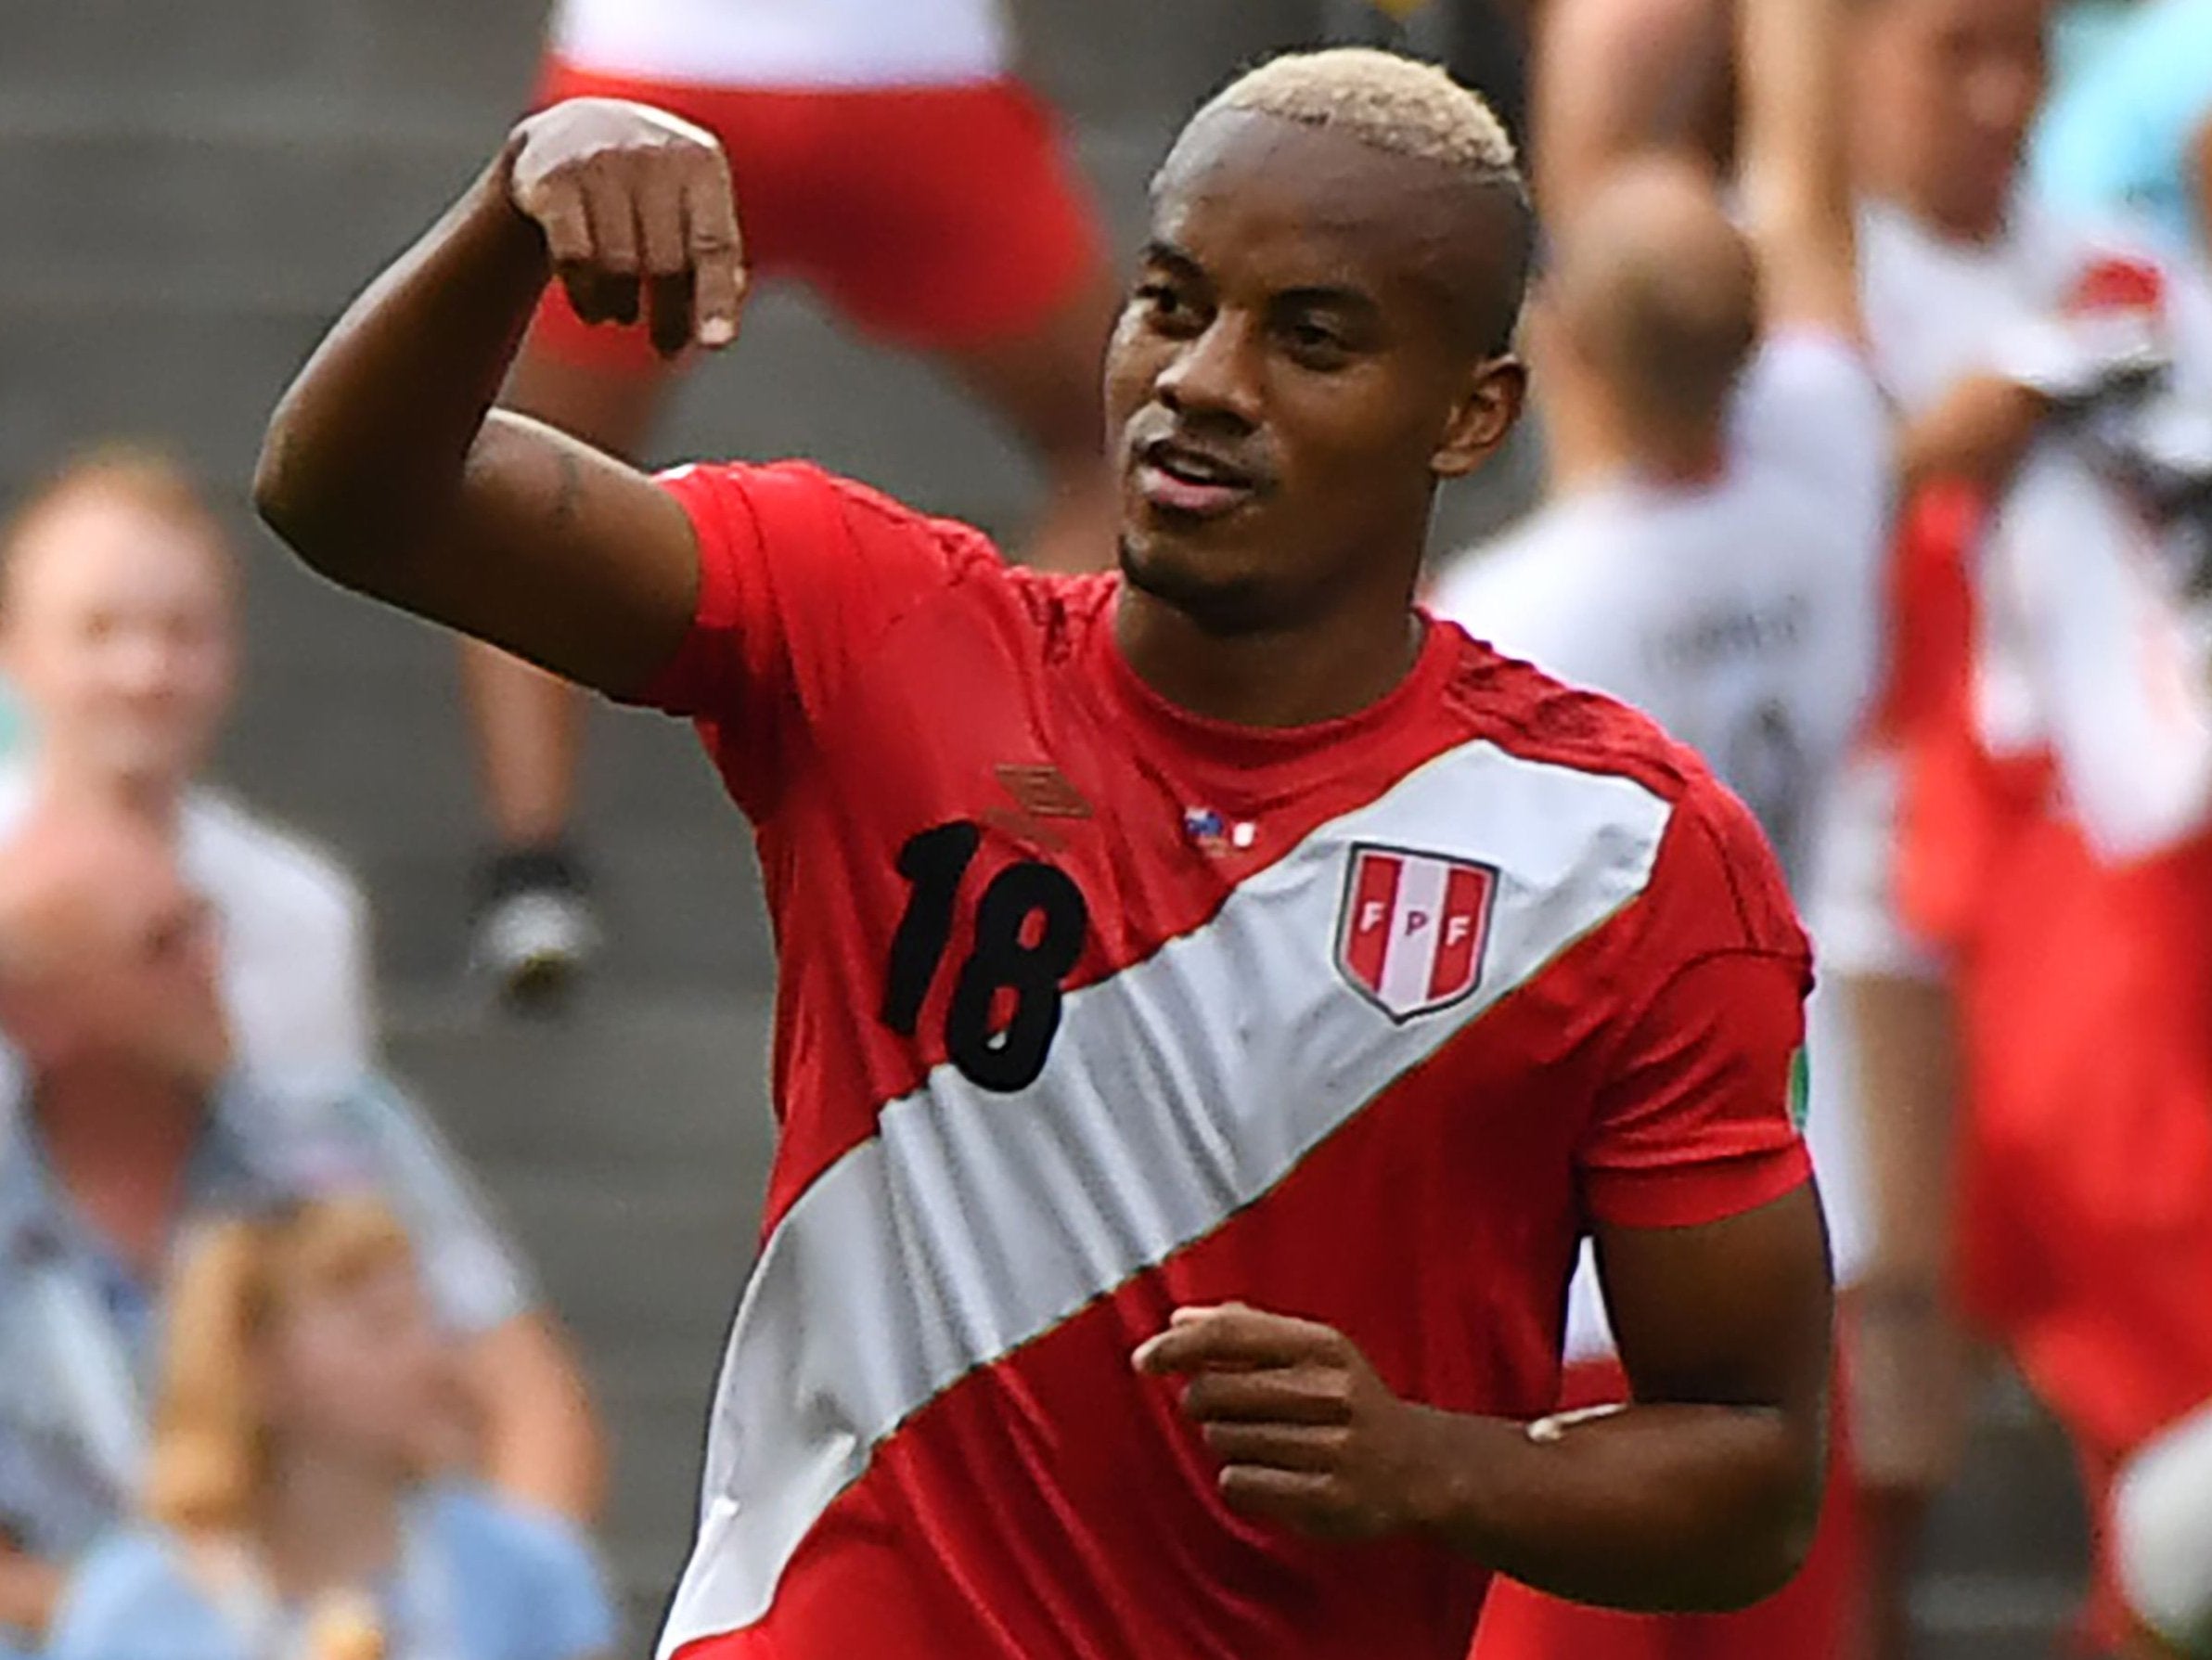 Peru's forward Andre Carrillo celebrates after scoring the opening goal